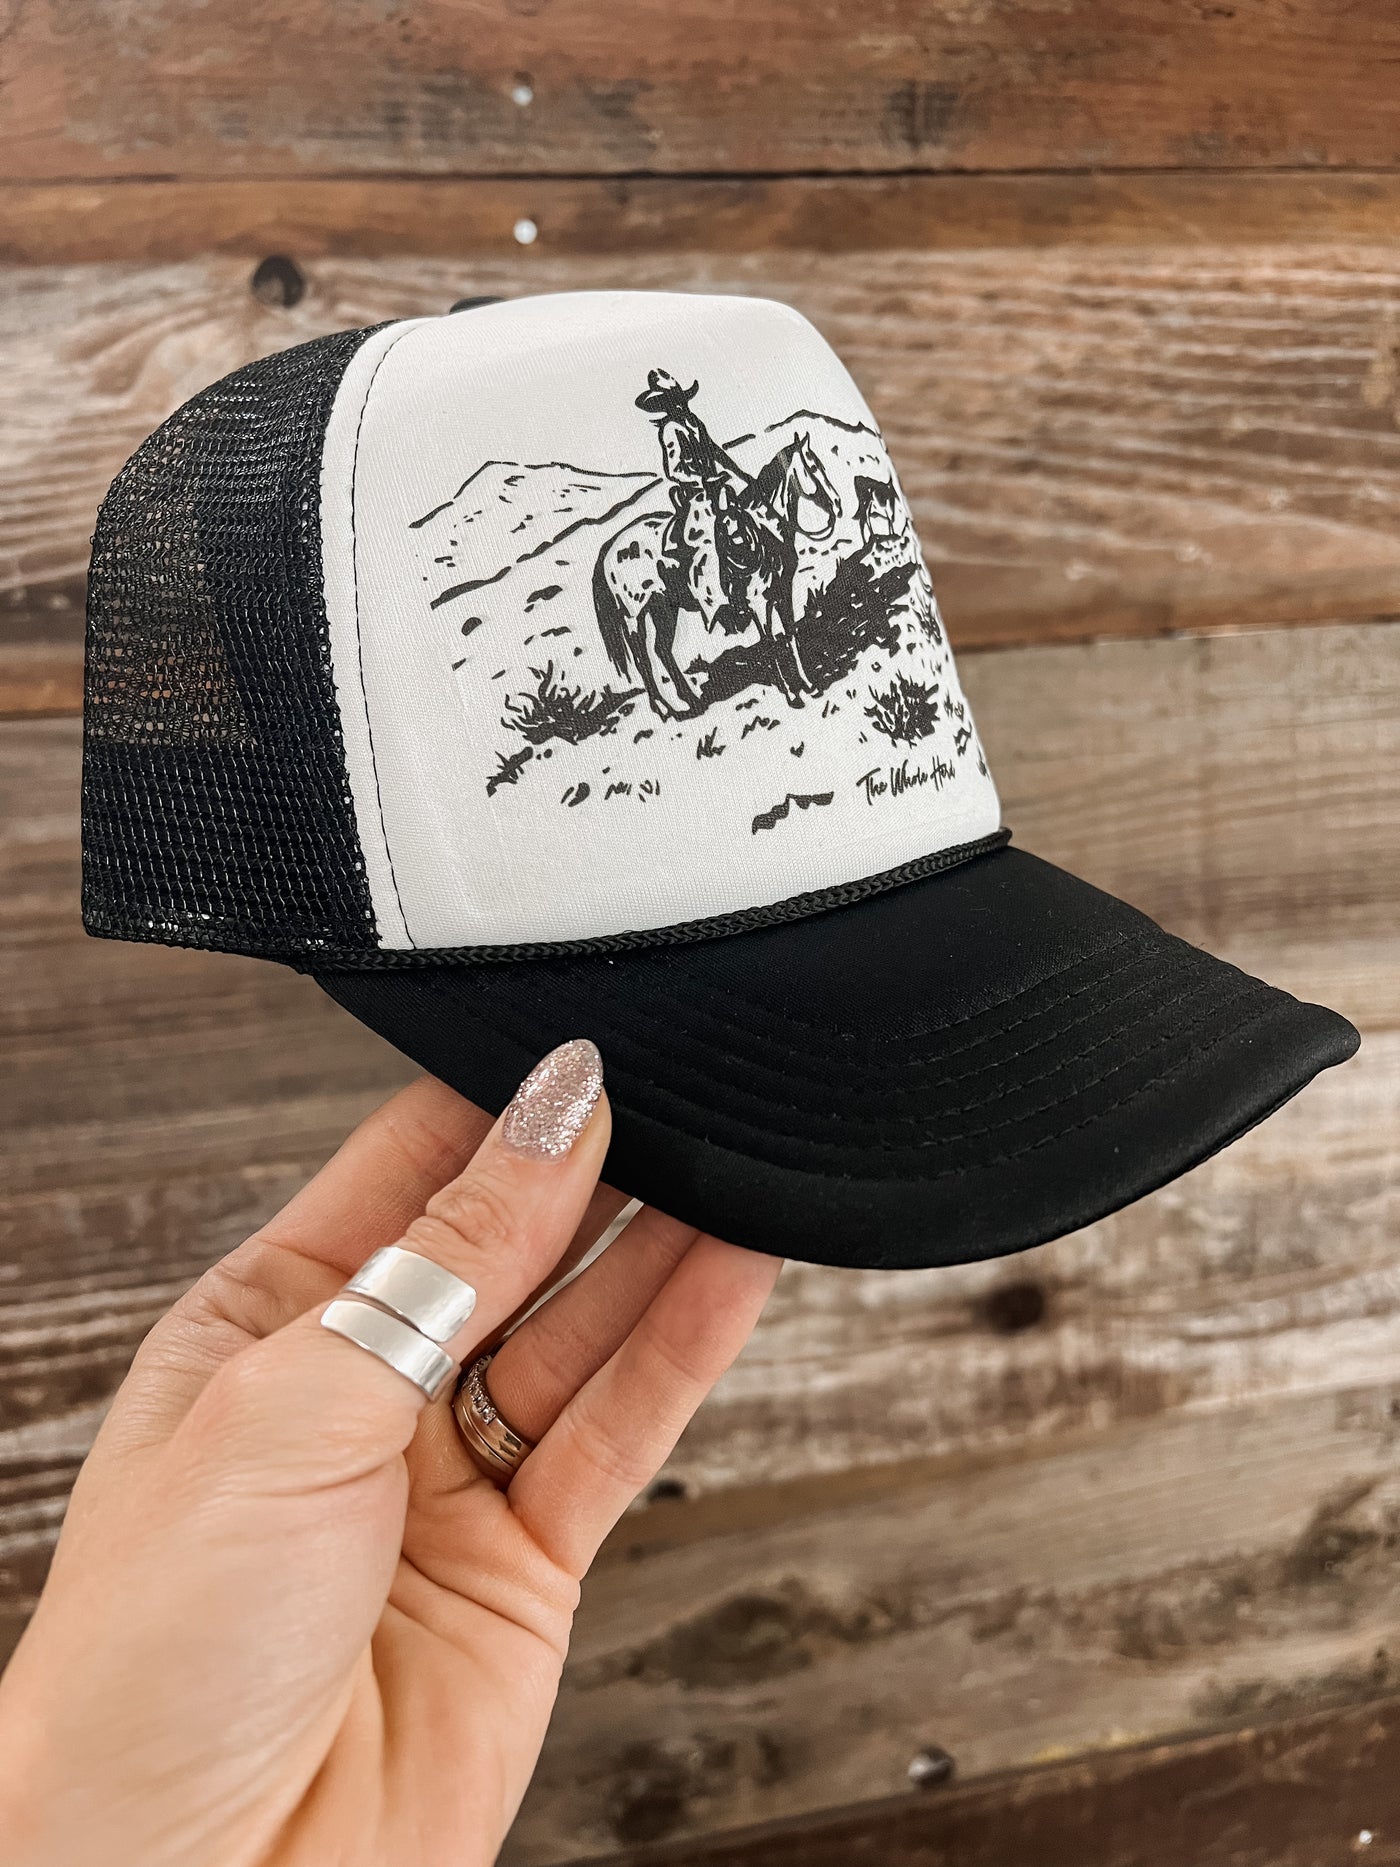 Way Out West Trucker Hat